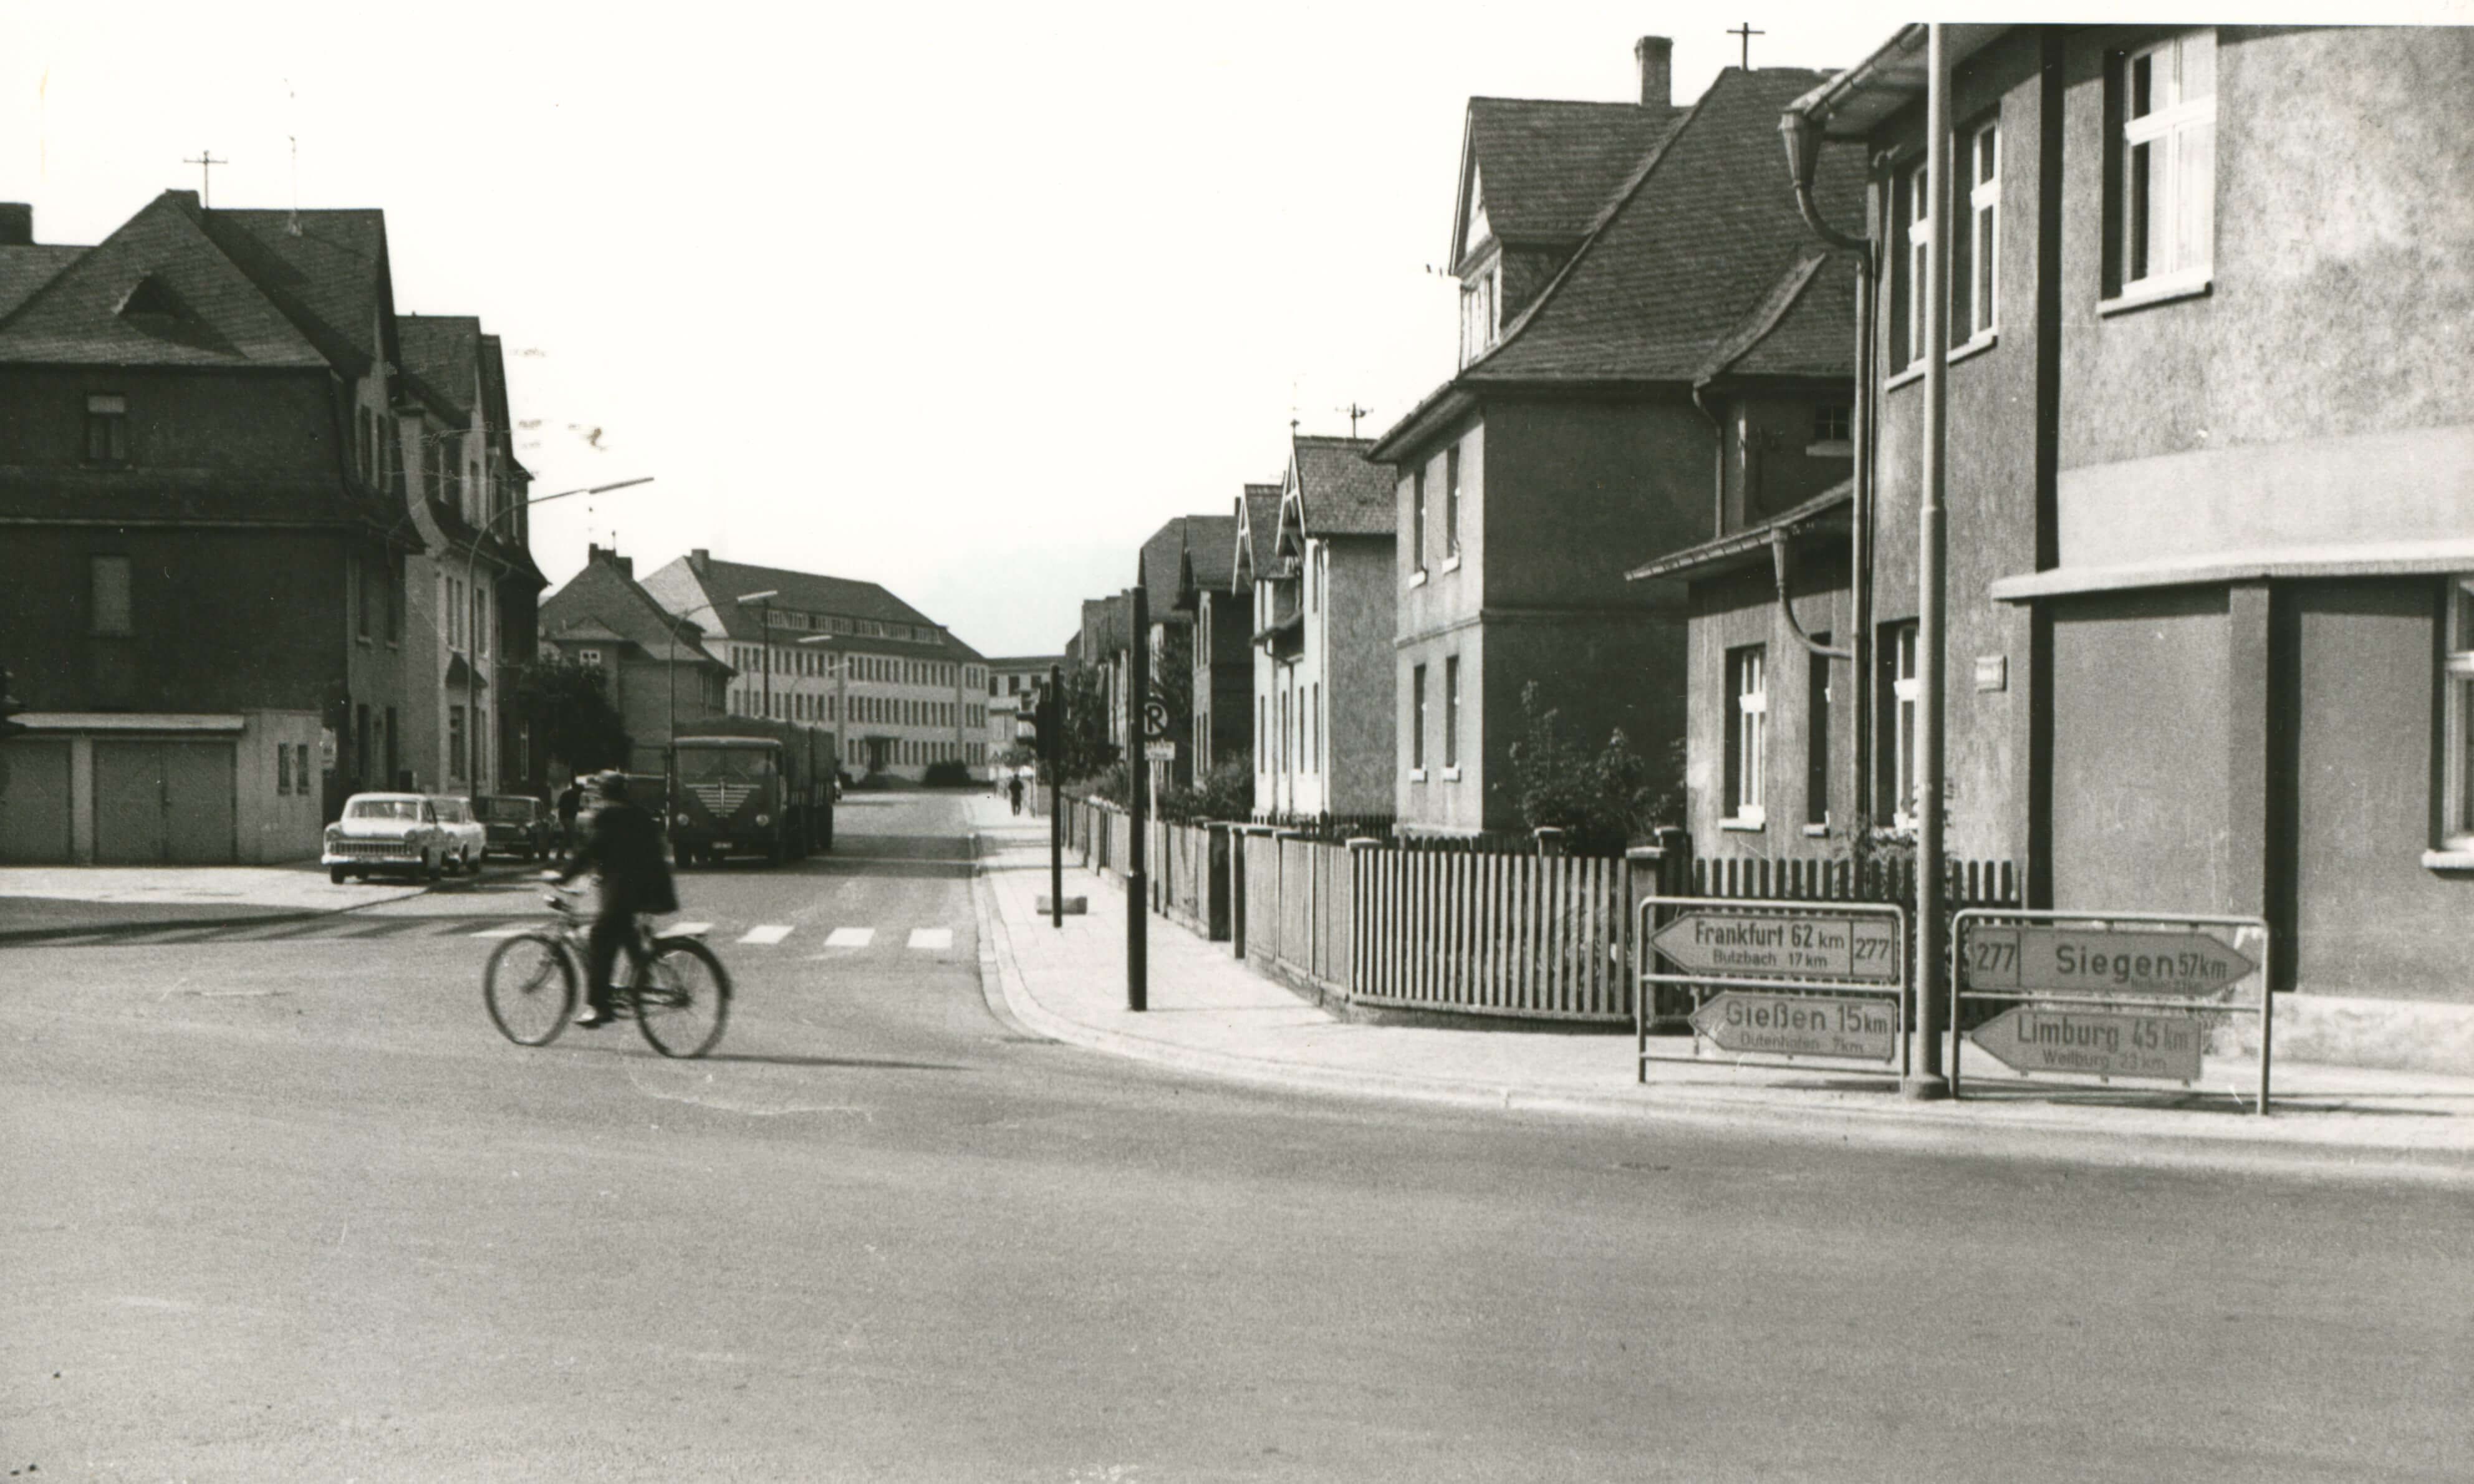 A historic photo in black and white depicting a street corner with rows of houses and a man driving past on a bike.